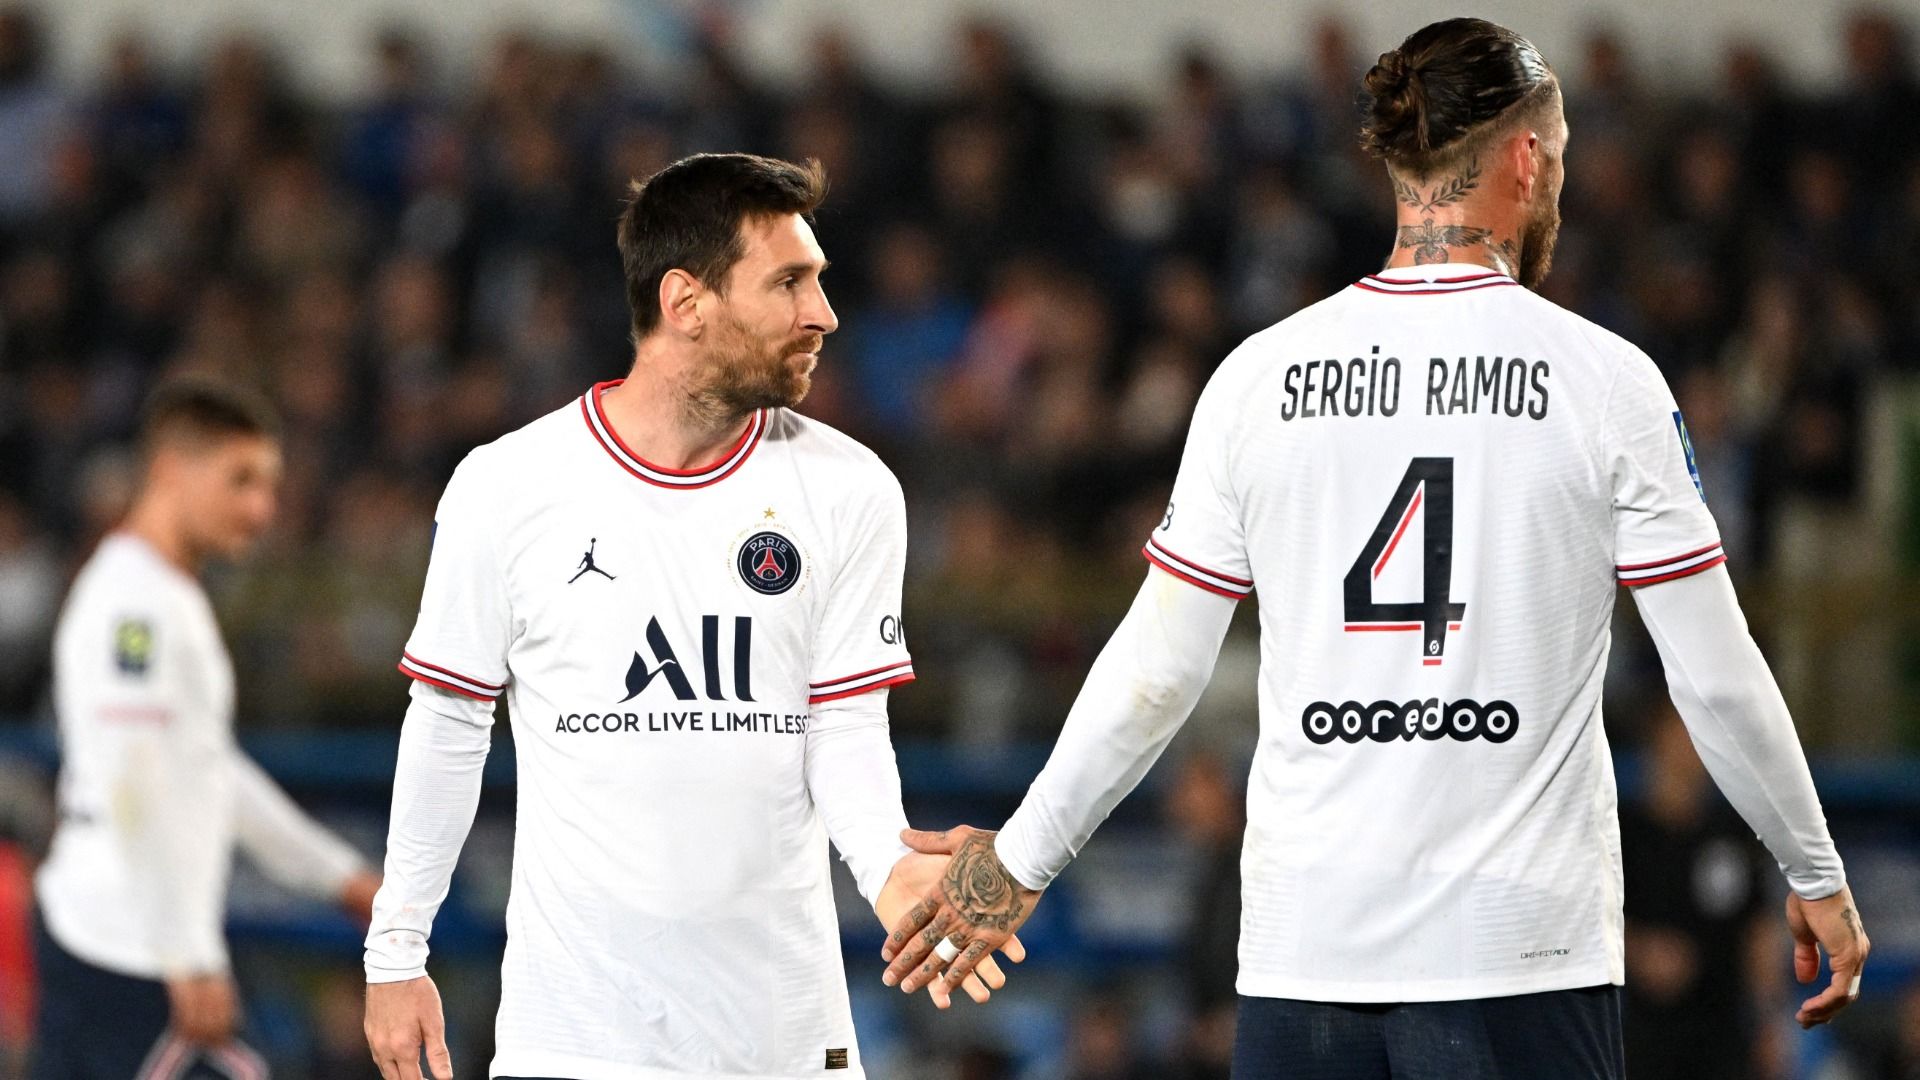 Ramos shared his emotions about playing together with Messi for PSG